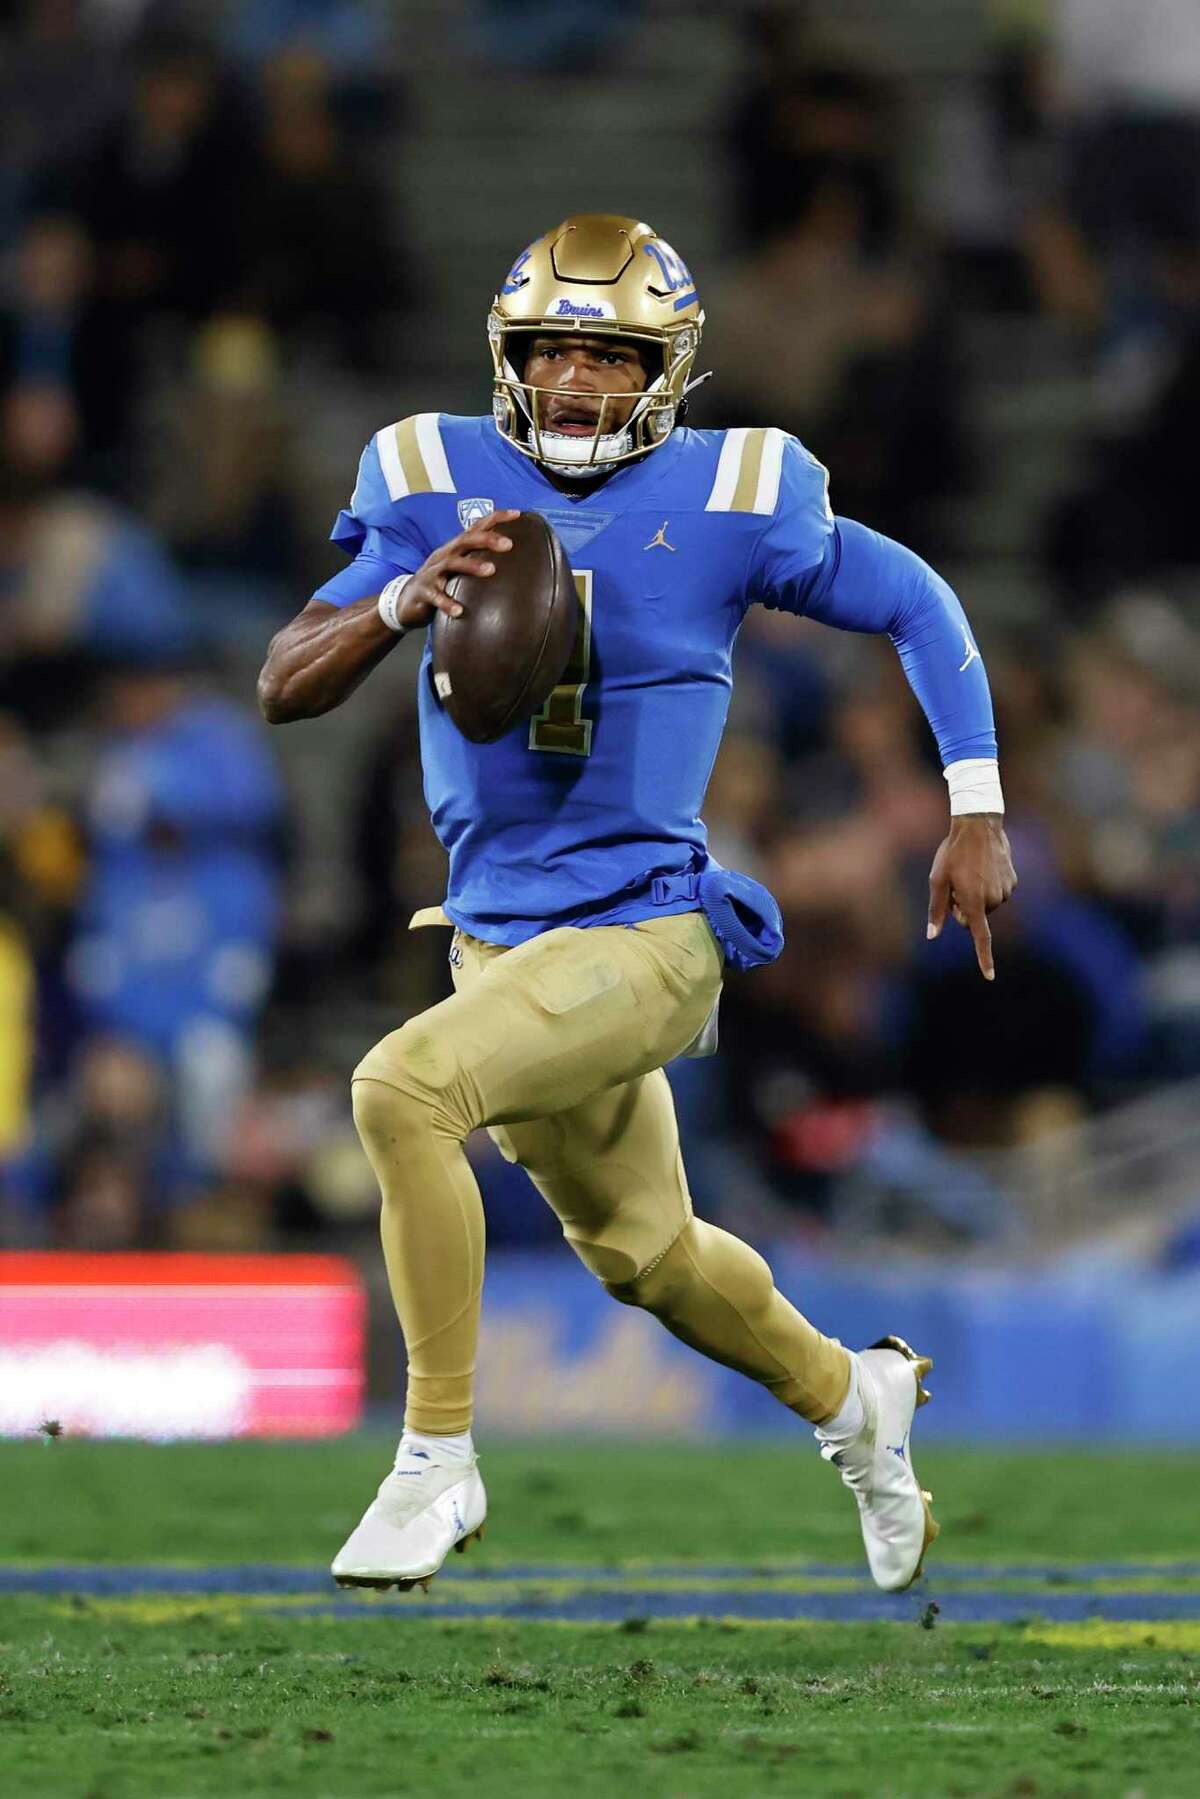 PASADENA, CALIFORNIA - NOVEMBER 27: Dorian Thompson-Robinson #1 of the UCLA Bruins runs against the California Golden Bears during the first half at Rose Bowl on November 27, 2021 in Pasadena, California. (Photo by Michael Owens/Getty Images)